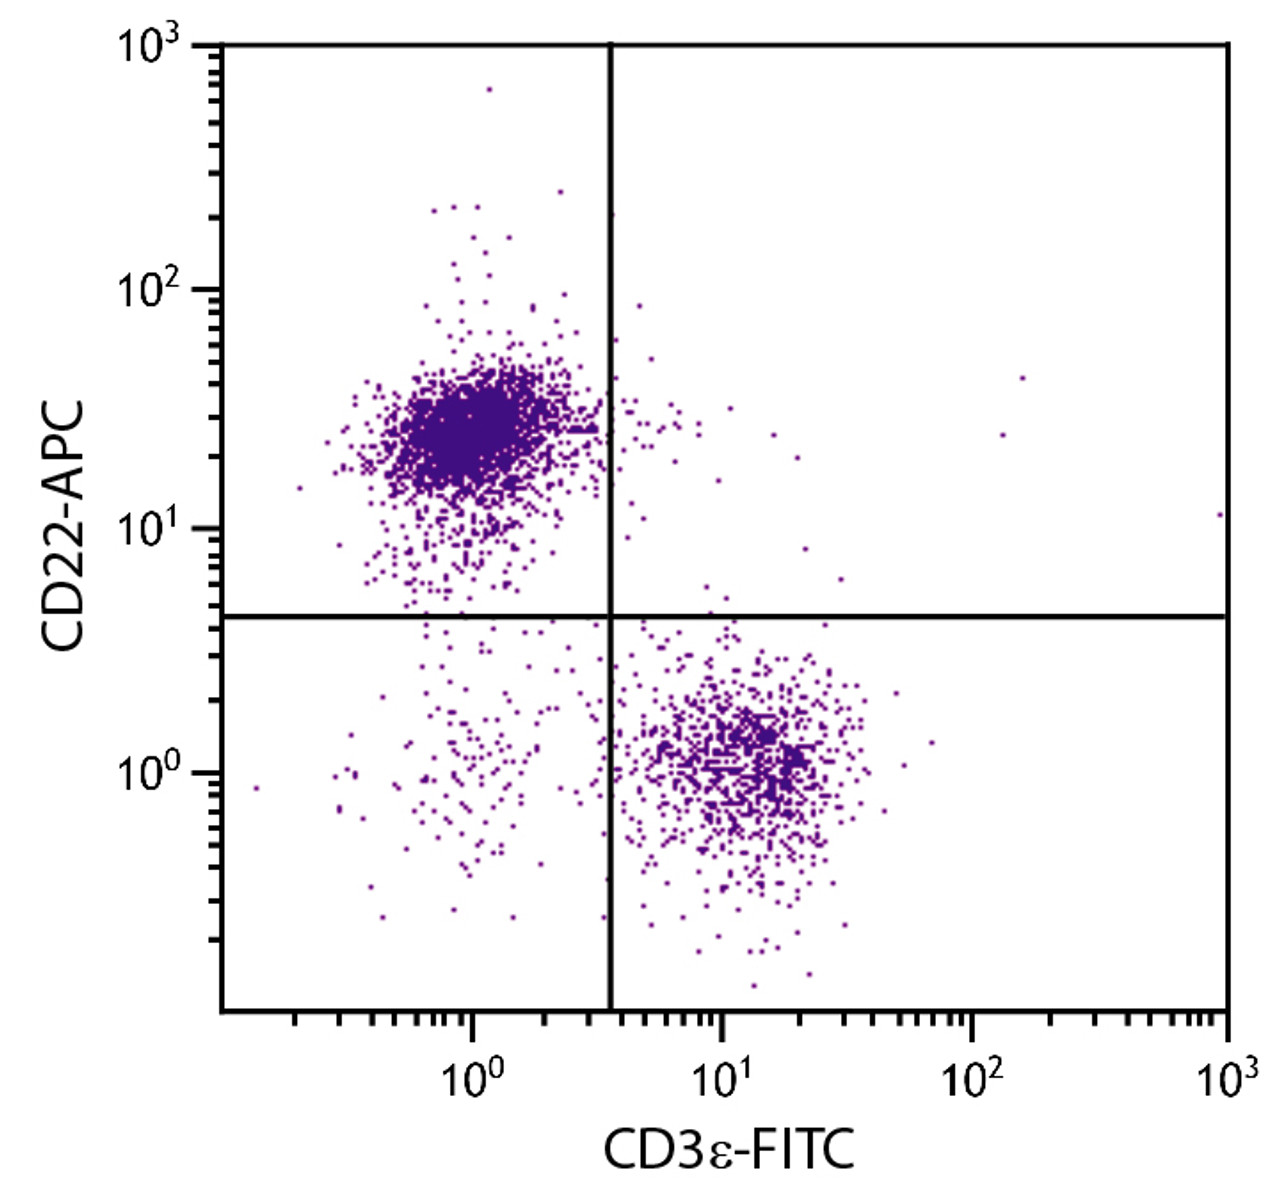 BALB/c mouse splenocytes were stained with Rat Anti-Mouse CD22-APC (Cat. No. 98-680) and Rat Anti-Mouse CD3?-FITC .